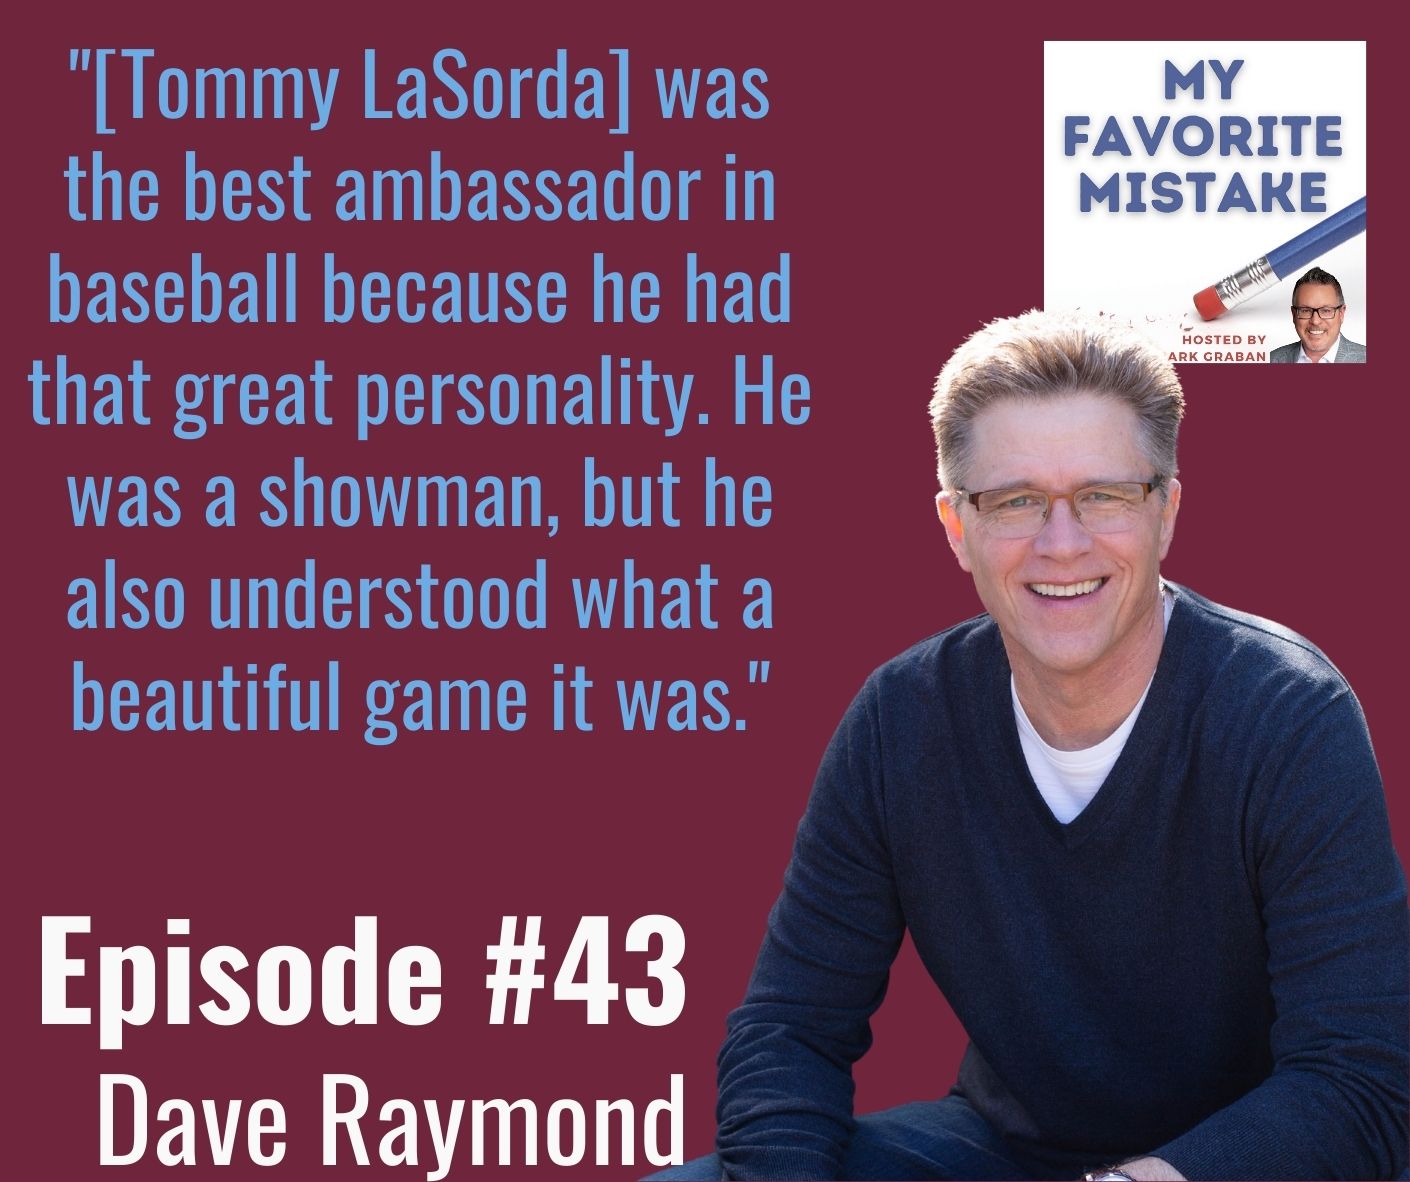 "[Tommy LaSorda] was the best ambassador in baseball because he had that great personality. He was a showman, but he also understood what a beautiful game it was."